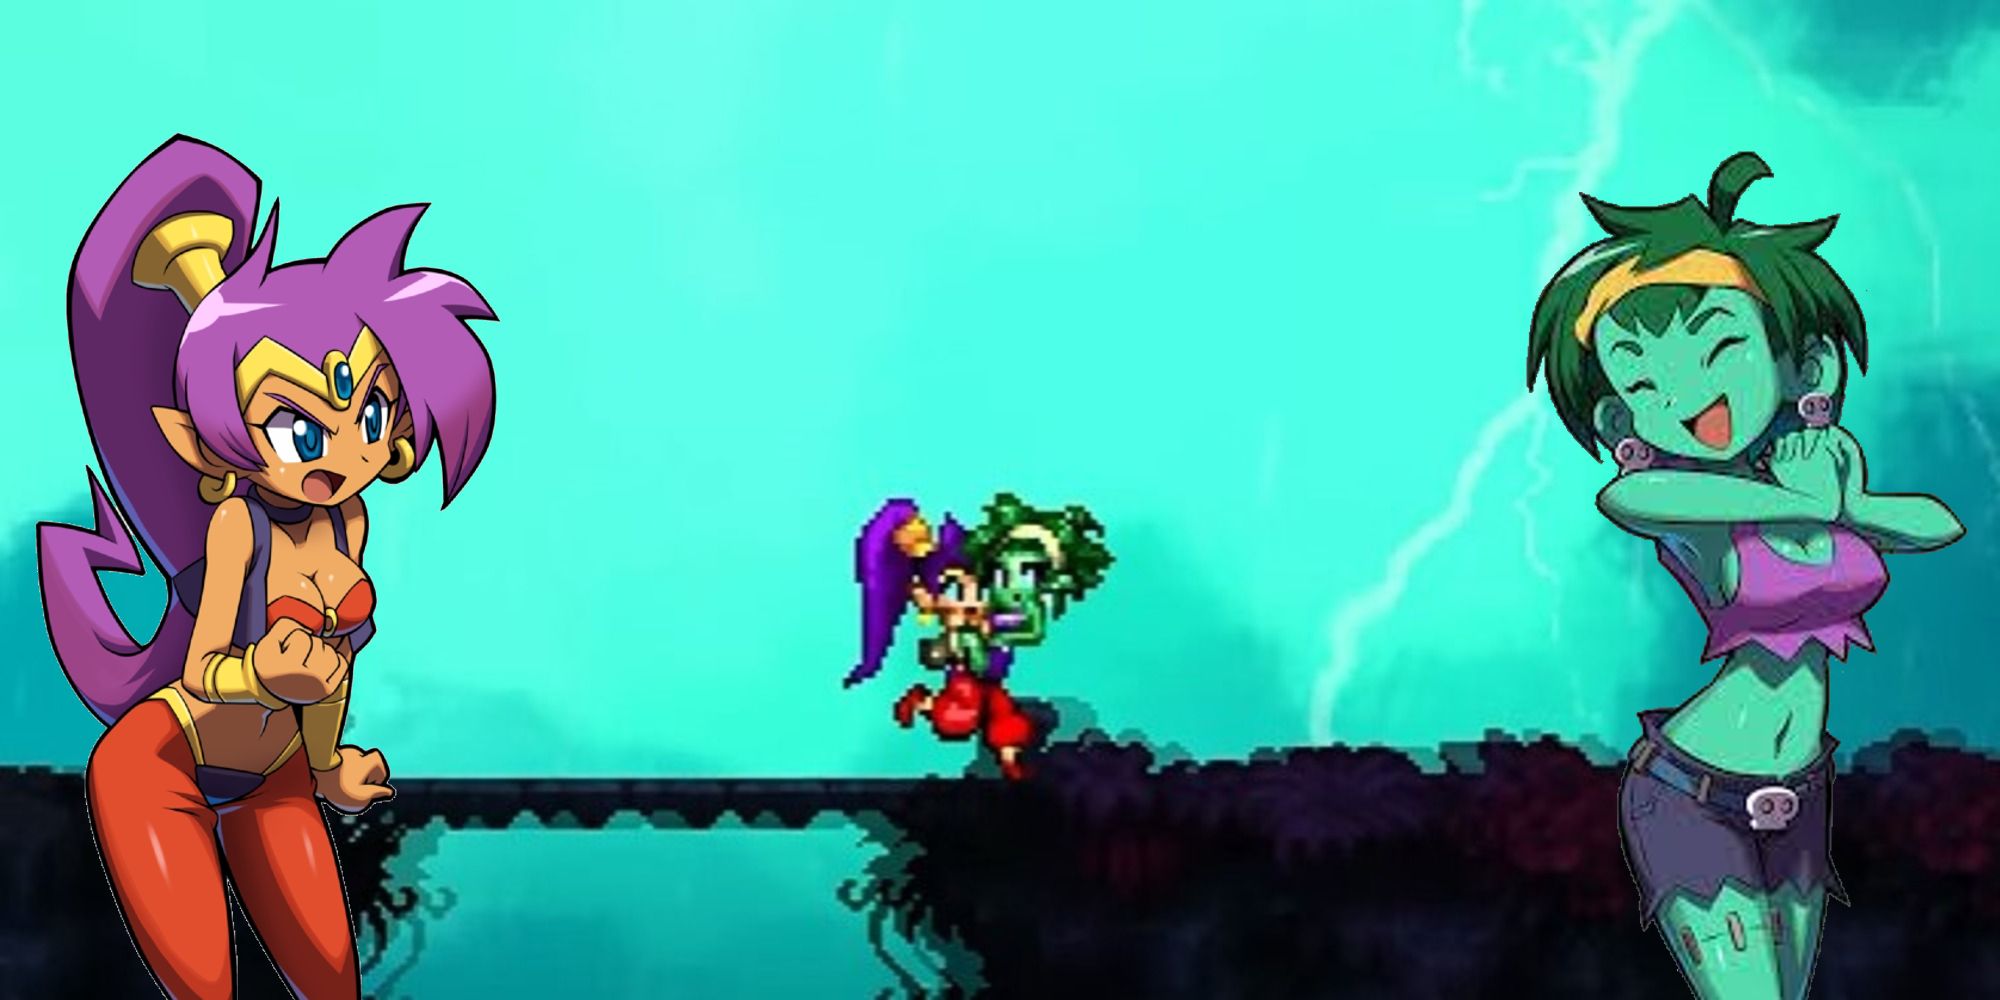 The Run Run Rottytops segment of Shantae and the Pirate's Curse, with 2D art of Shantae on the left and Rottytops on the right.